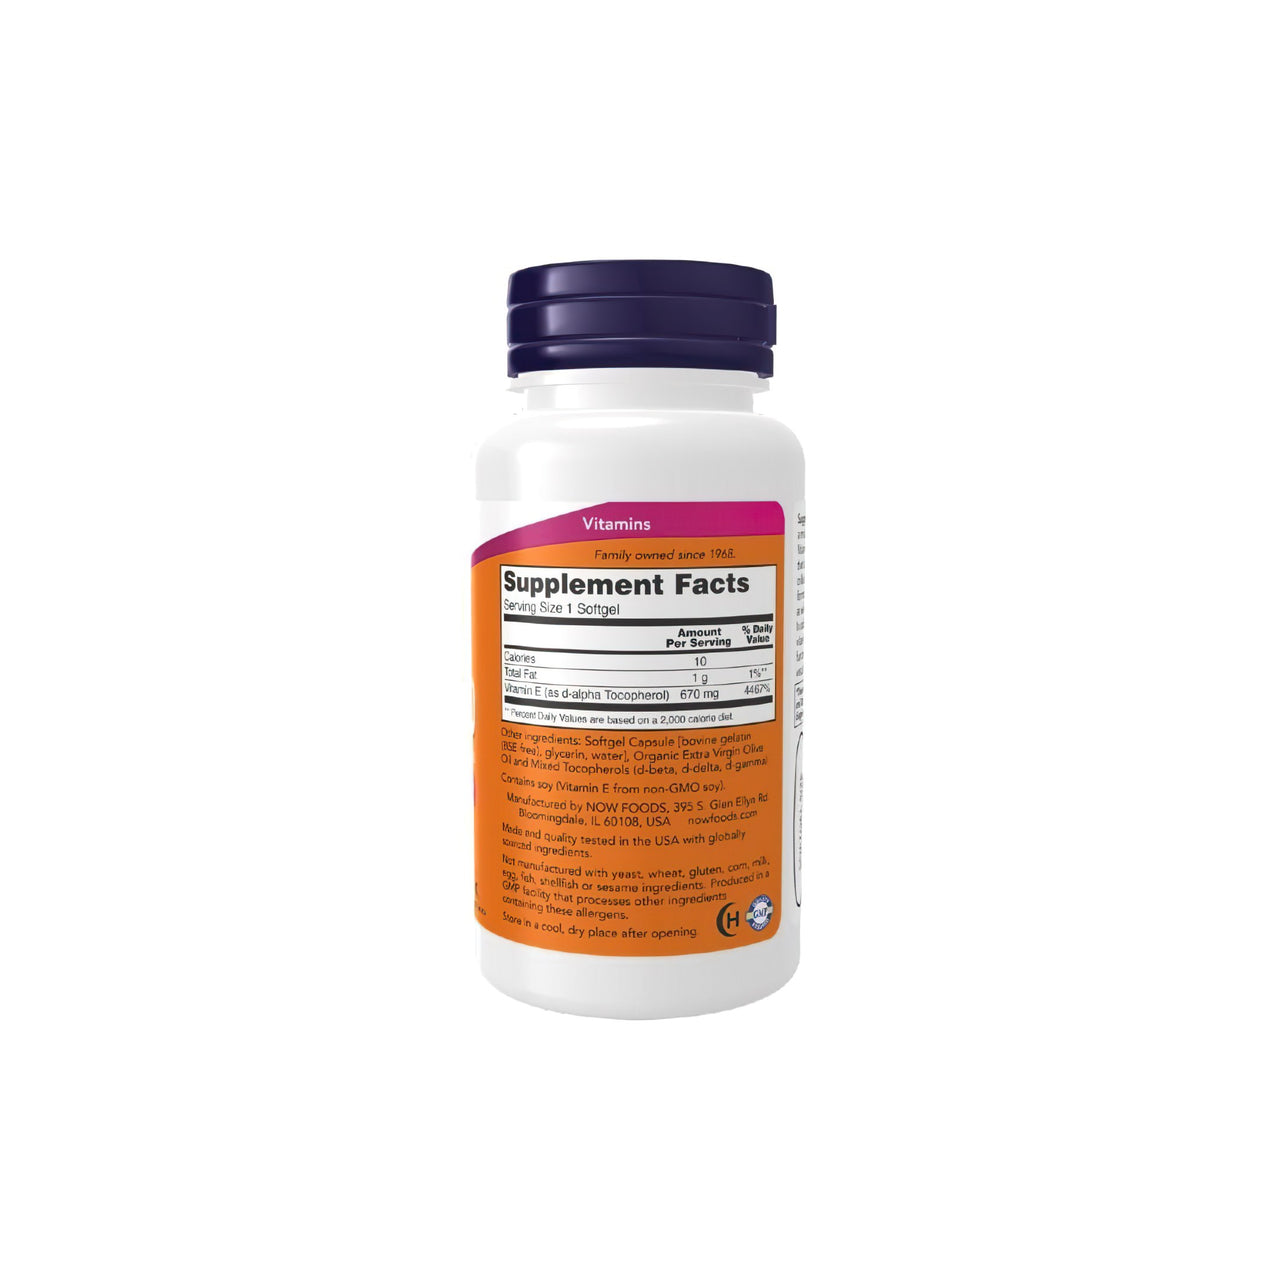 A bottle of Now Foods Vitamin E-1000 Mixed Tocopherols 50 Softgels on a white background.